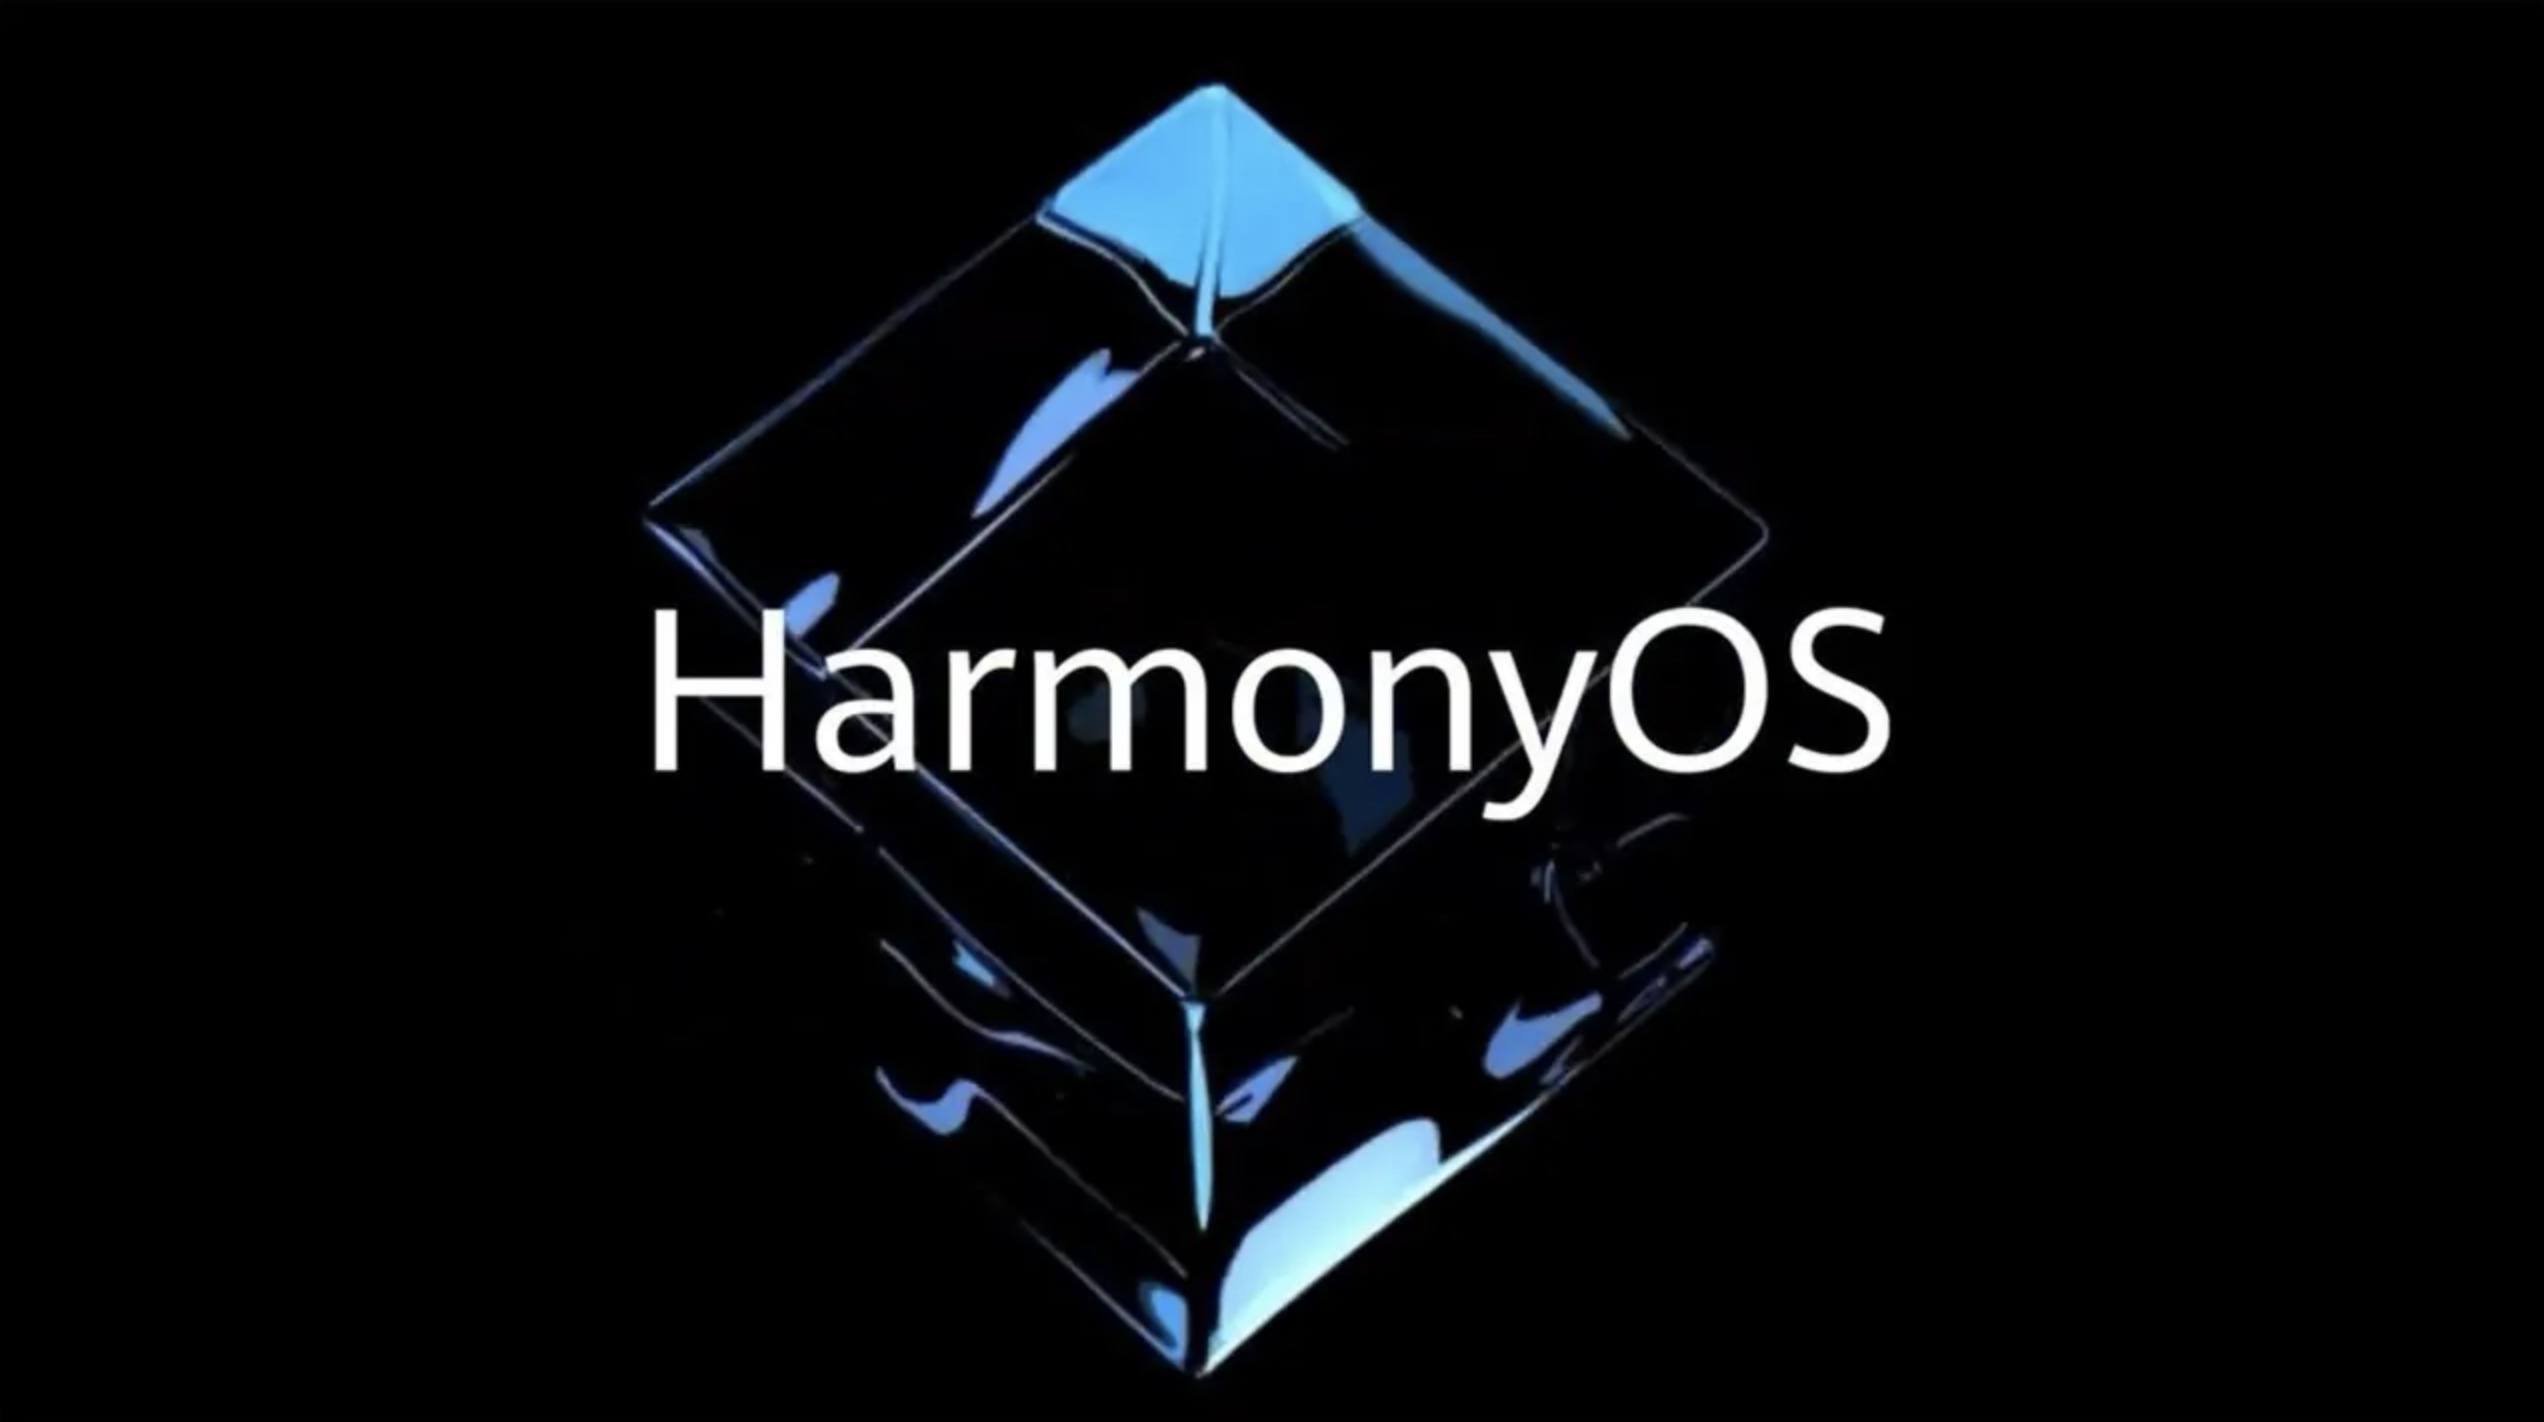 There will be no HarmonyOS smartphones in 2020, confirms Huawei CEO